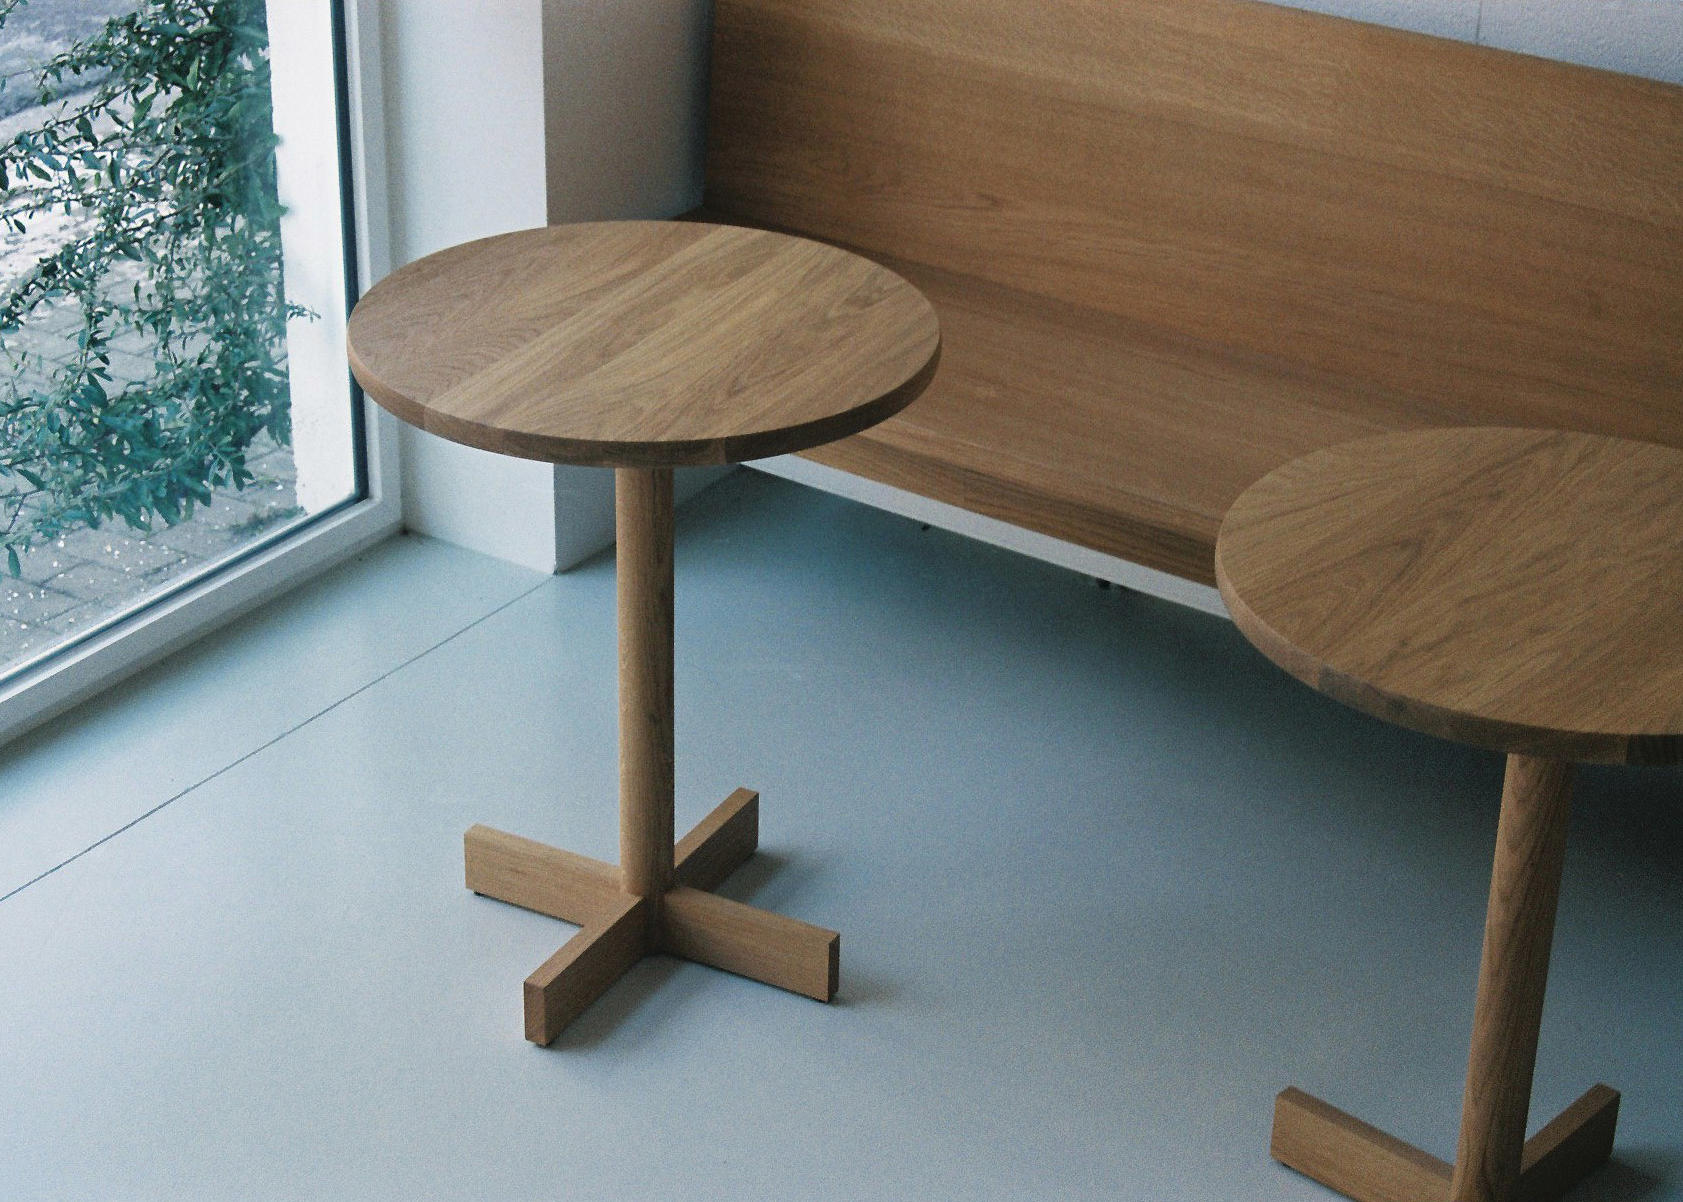 CAFé TABLE - Bistro tables from Bautier | Architonic